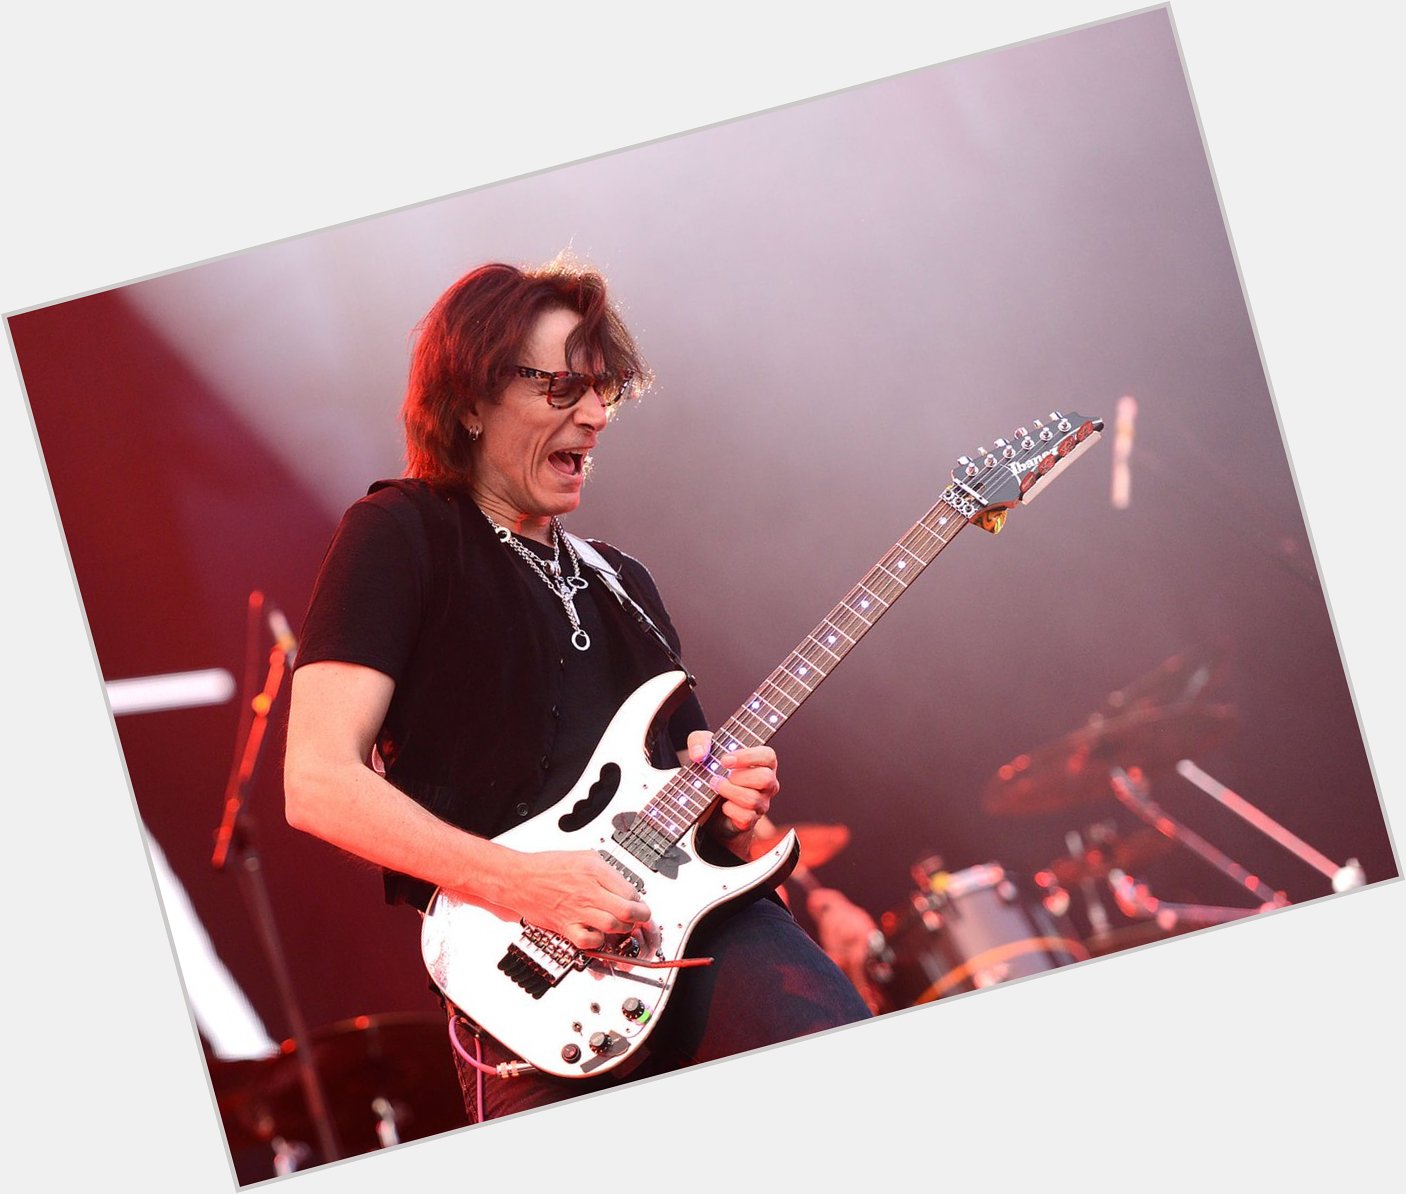 Happy 63rd Birthday to the Jedi Master of rock guitar, Steve Vai! 